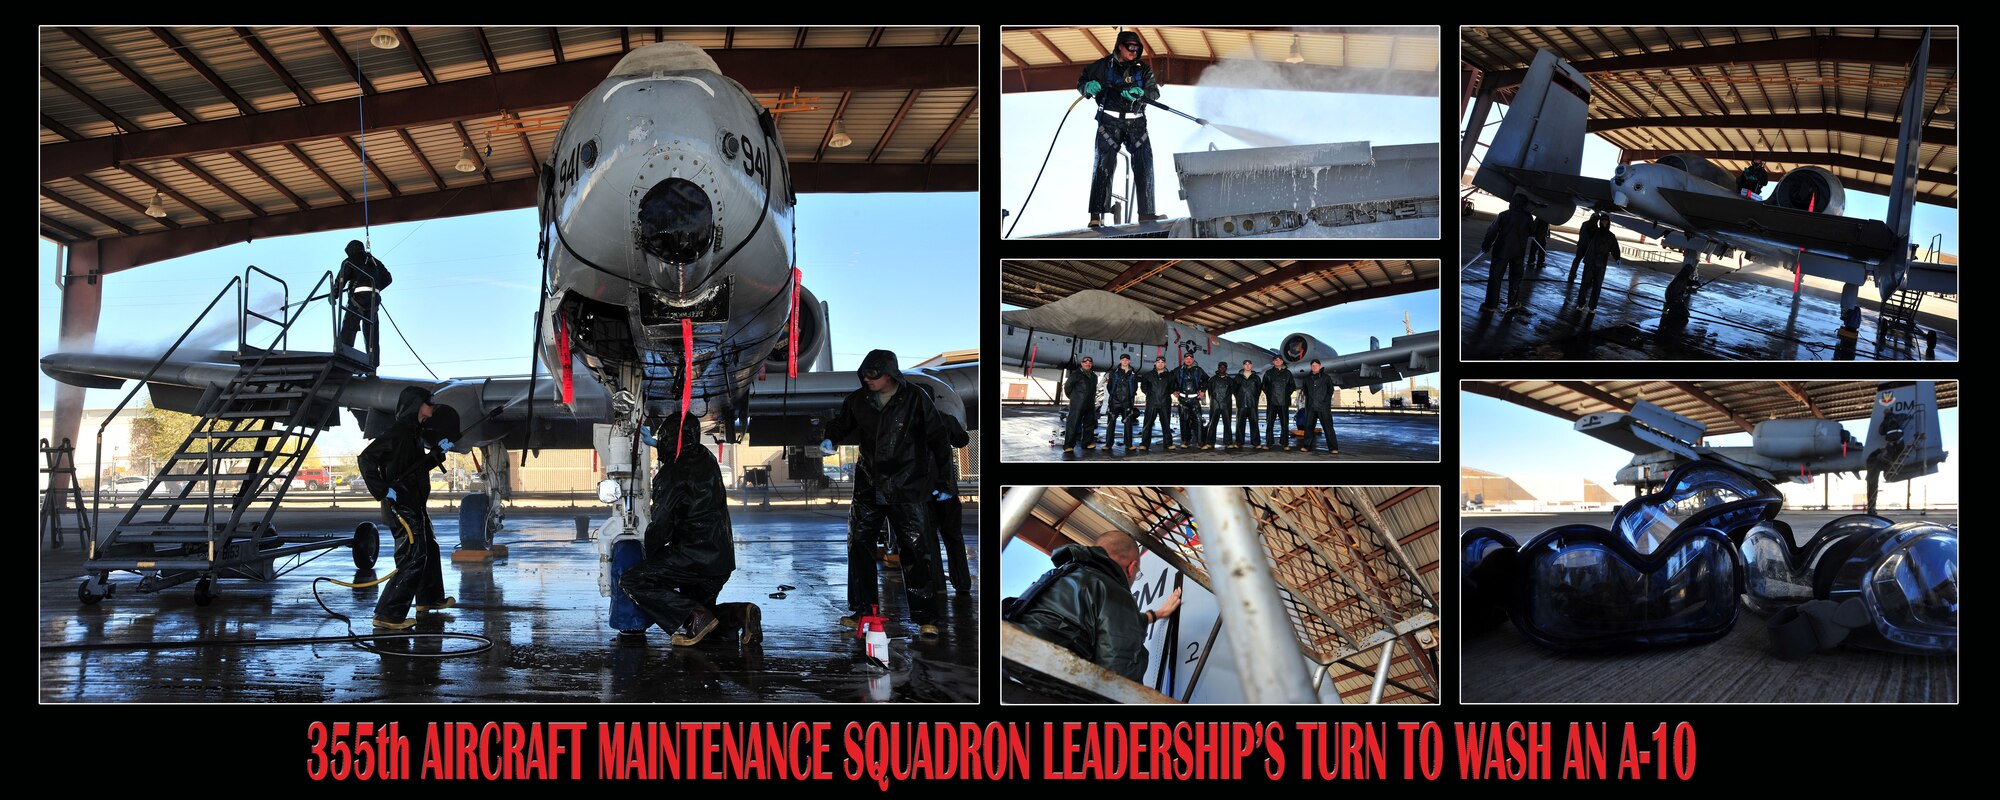 The 355th Aircraft Maintenance Squadron leadership work with their Airmen to wash an A-10C Thunderbolt at Davis-Monthan Air Force Base, Ariz., Jan. 28, 2014.  The Airmen use pressure washers with more than 3,000 pounds of pressure per square inch to clean the aircraft. 